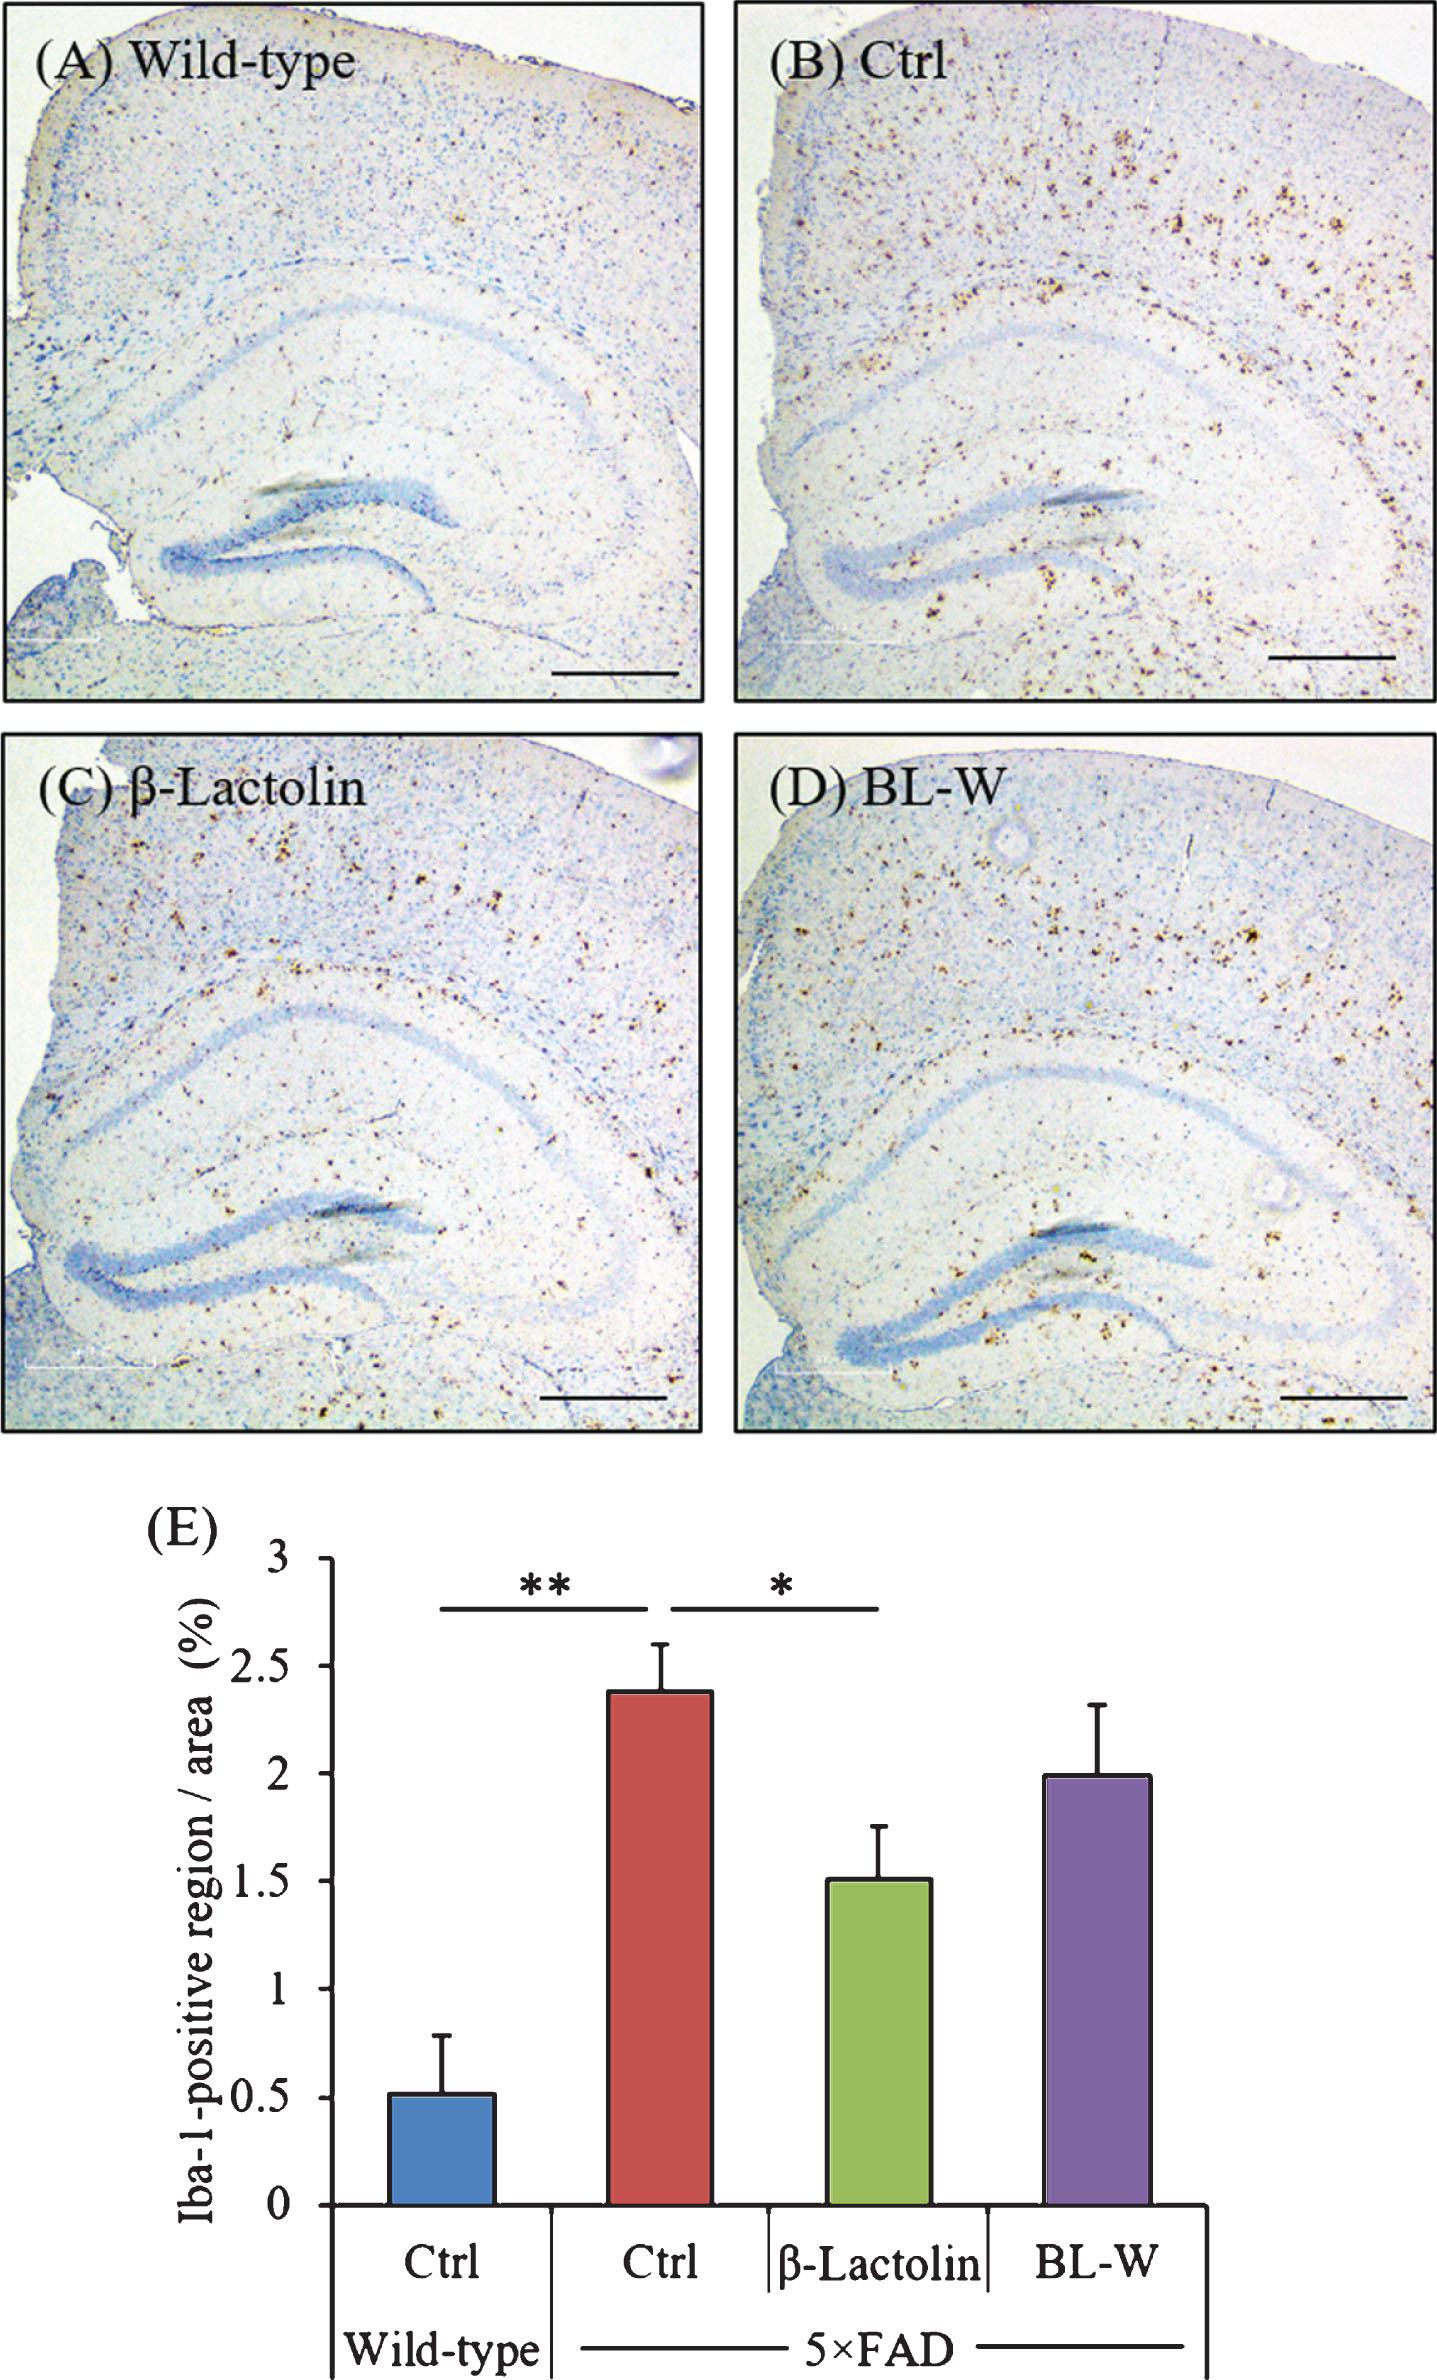 Effects of β-lactolin on microglial infiltration in 5×FAD mice. Transgenic 5×FAD and wild-type male mice aged 2.5 months were fed a diet with or without 0.05% w/w β-lactolin or 5% w/w β-lactolin-rich whey enzymatic digestion (BL-W) for 3.5 months. A-D) Representative immunohistochemistry images for Iba-1 in wild-type mice, transgenic control mice (Ctrl), and transgenic mice fed a diet containing β-lactolin or BL-W. Scale bars, 400μm. E) Percentage of the Iba-1-positive area detected by immunohistochemistry in the cortex in transgenic control mice (Ctrl) and transgenic mice fed a diet containing β-lactolin or BL-W. Data are presented as means±SEM (sample size: wild-type mice, 10; control transgenic mice, 10; transgenic mice fed with β-lactolin, 11; or transgenic mice fed with BL-W, 10). p-values shown in the graph were calculated by one-way ANOVA followed by the Tukey–Kramer test. *p < 0.05.